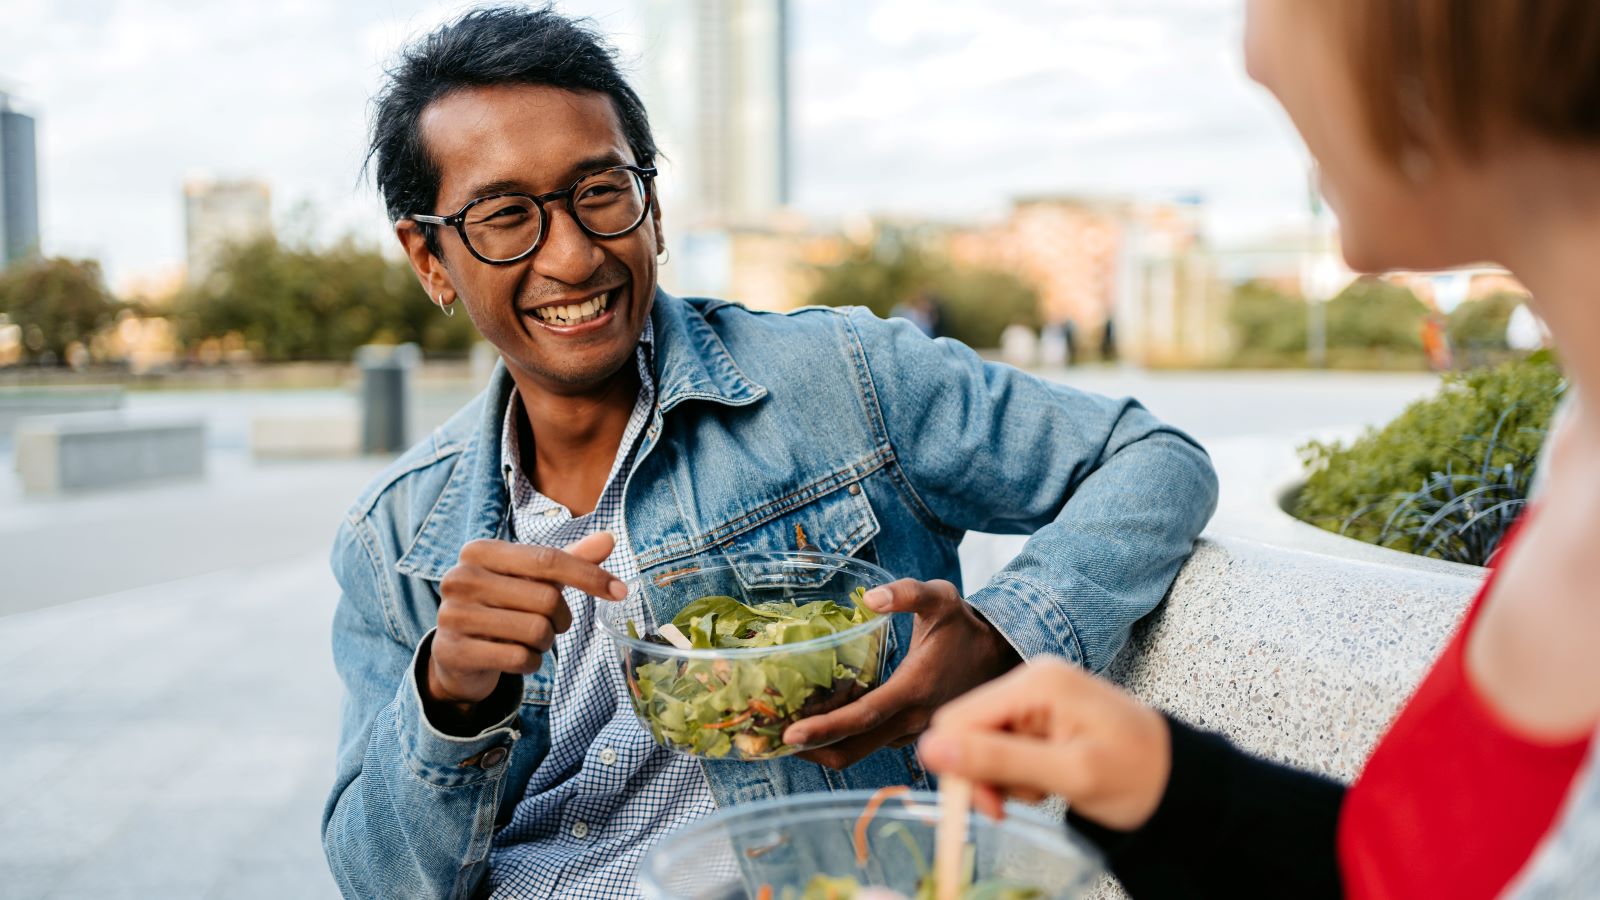 Some men opt for a plant-based diet, in hopes of either avoiding prostate cancer altogether or making for easier treatments. But does it work?